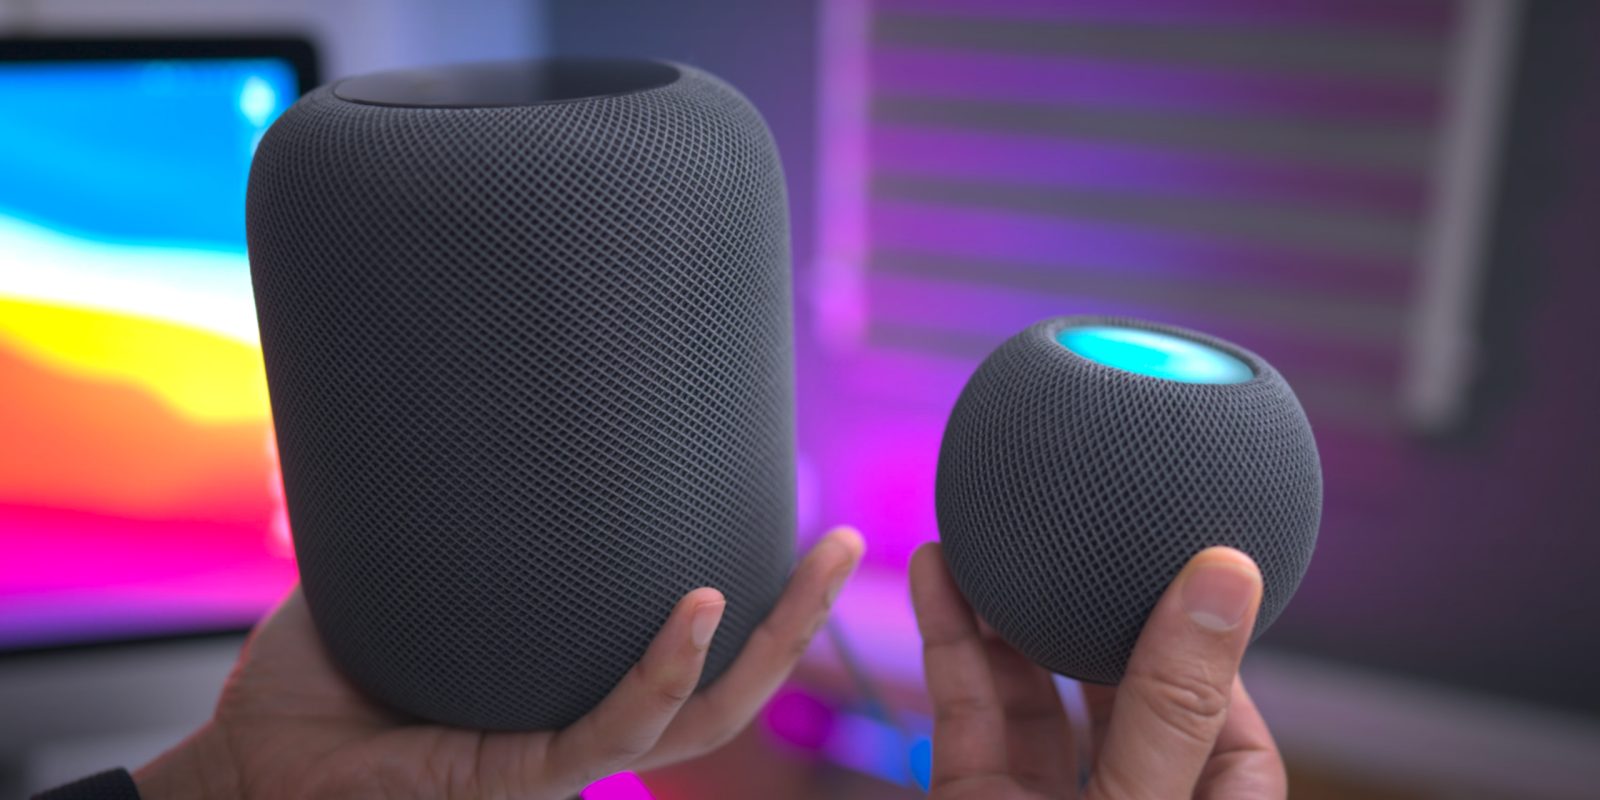 Gurman: Apple readying new HomePod and smart home devices